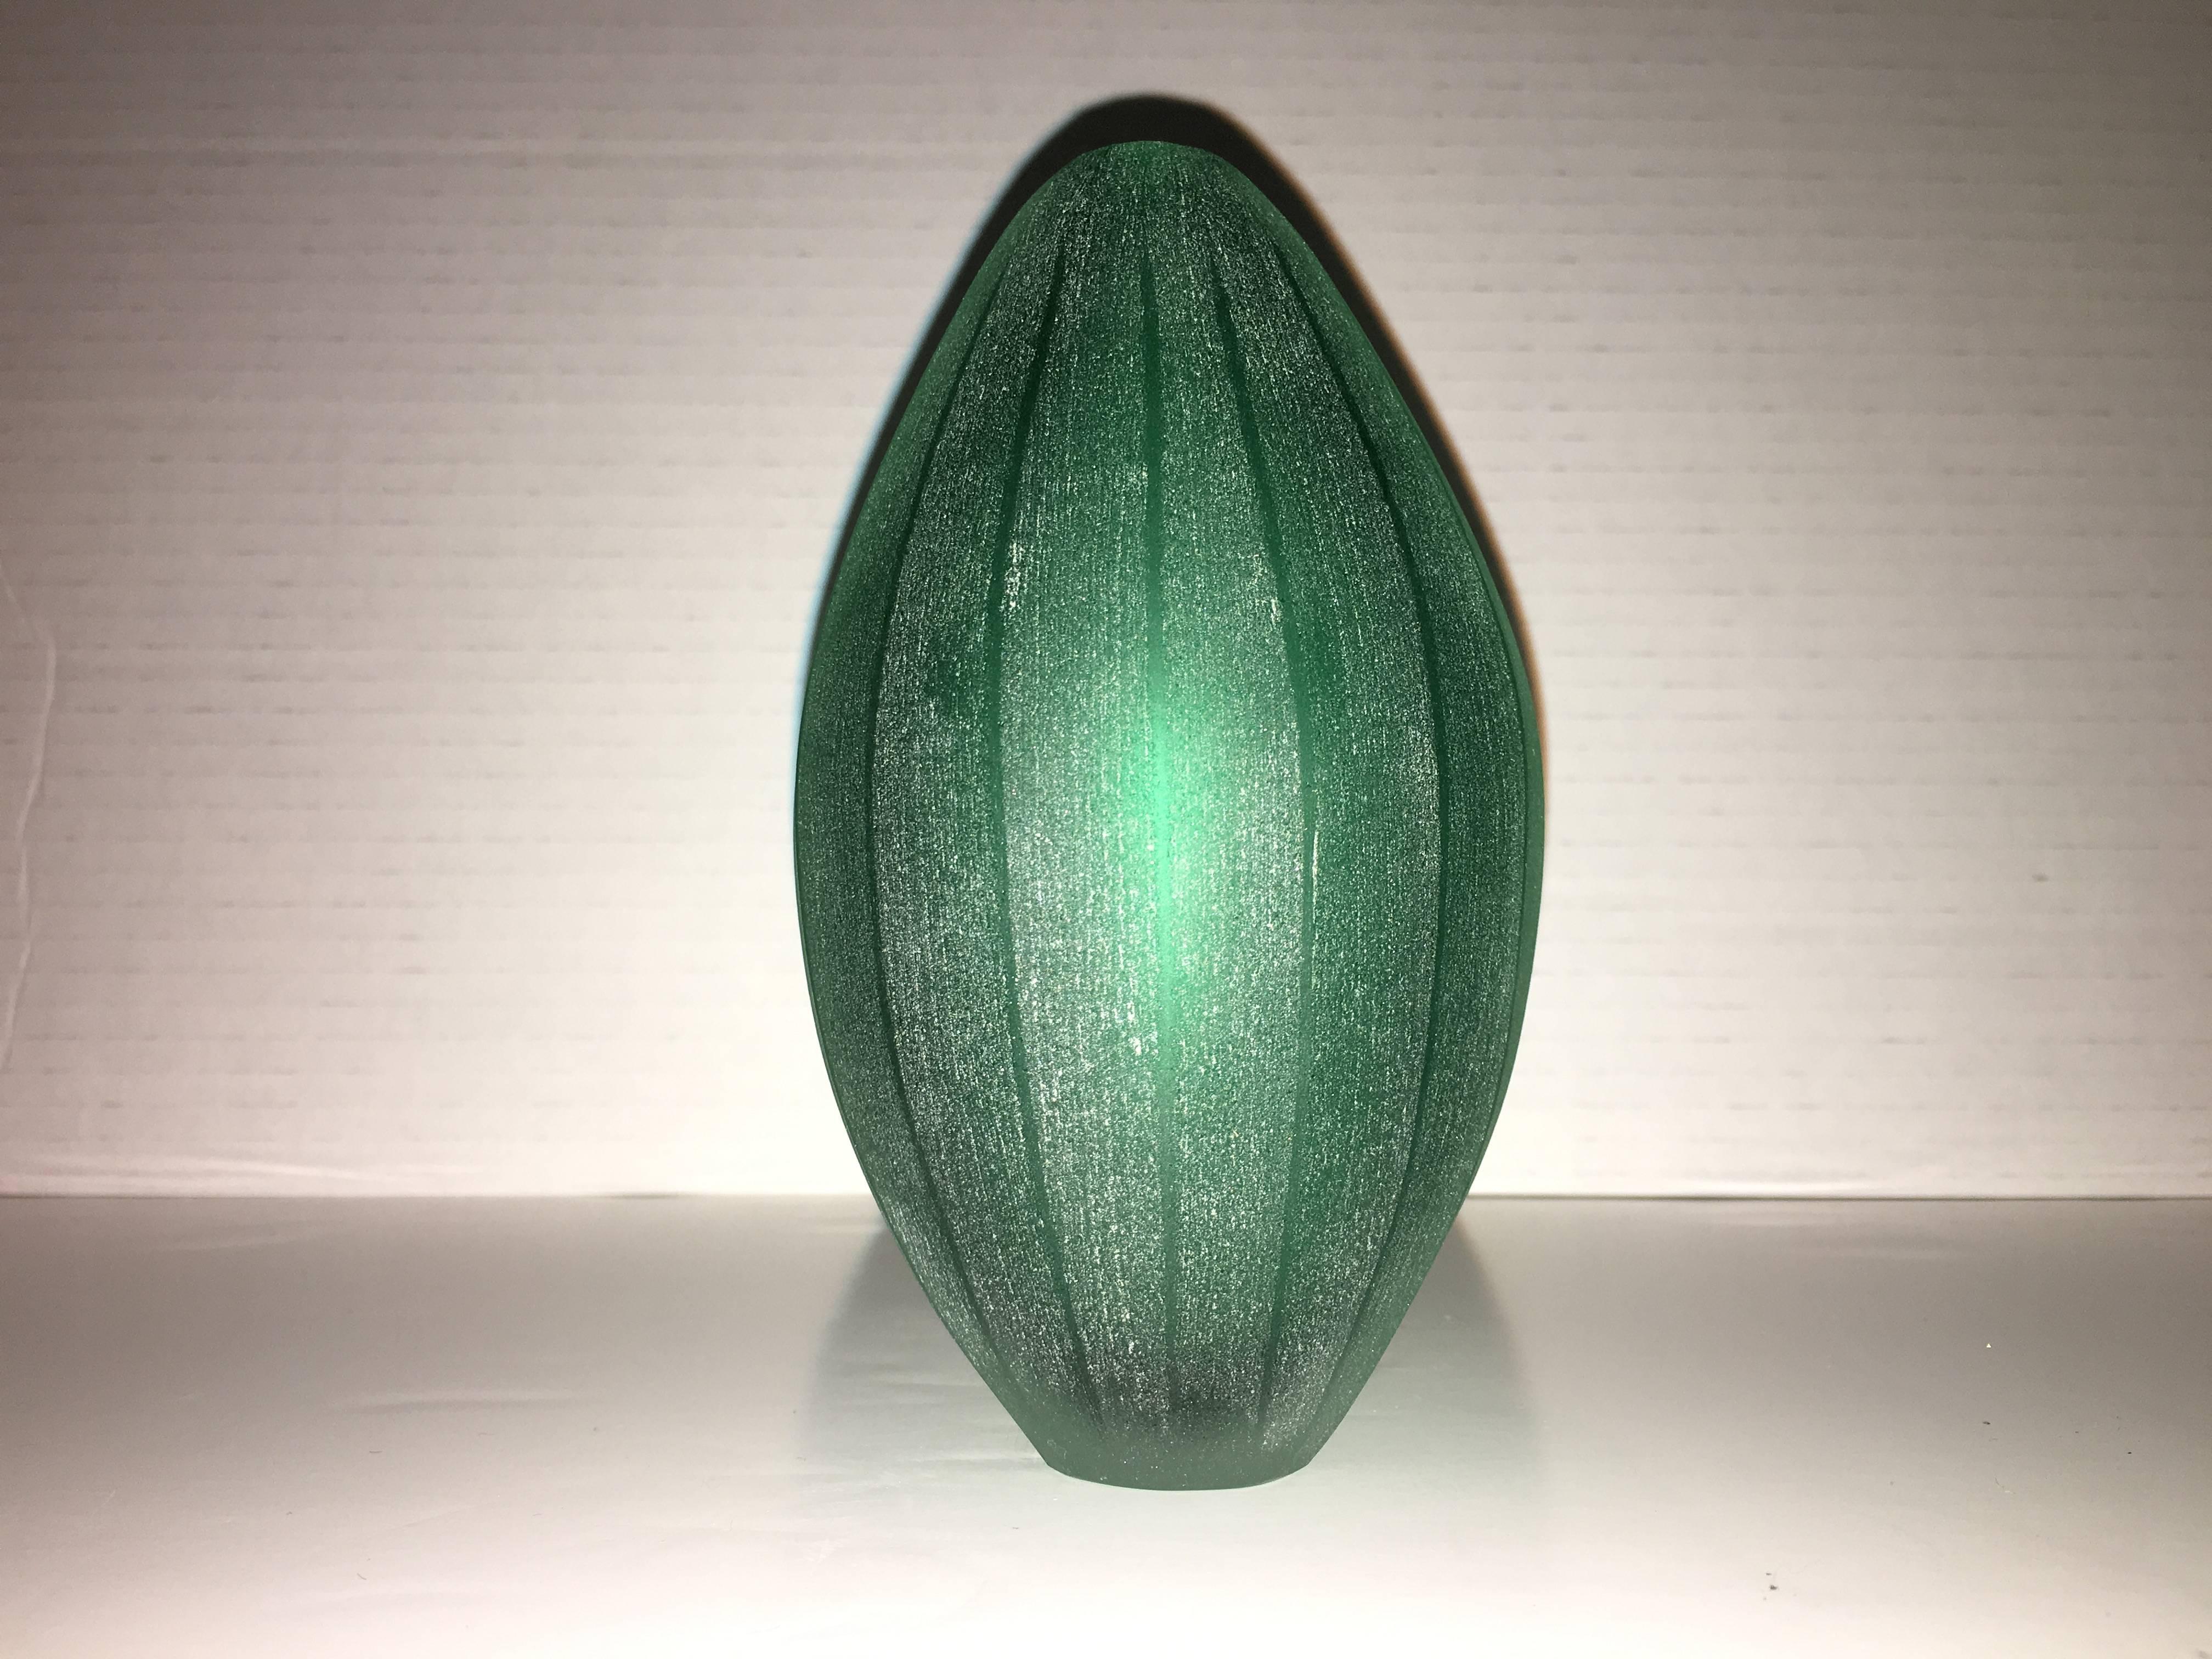 Vase designed by Laura de Santillana in edition for Arcade, 2001. this is from a series of tropical fruit and plant form inspired vases with the same matte, hand engraved, finish:
PAPAIA, made in three different shades of green. MANGO, made in dark